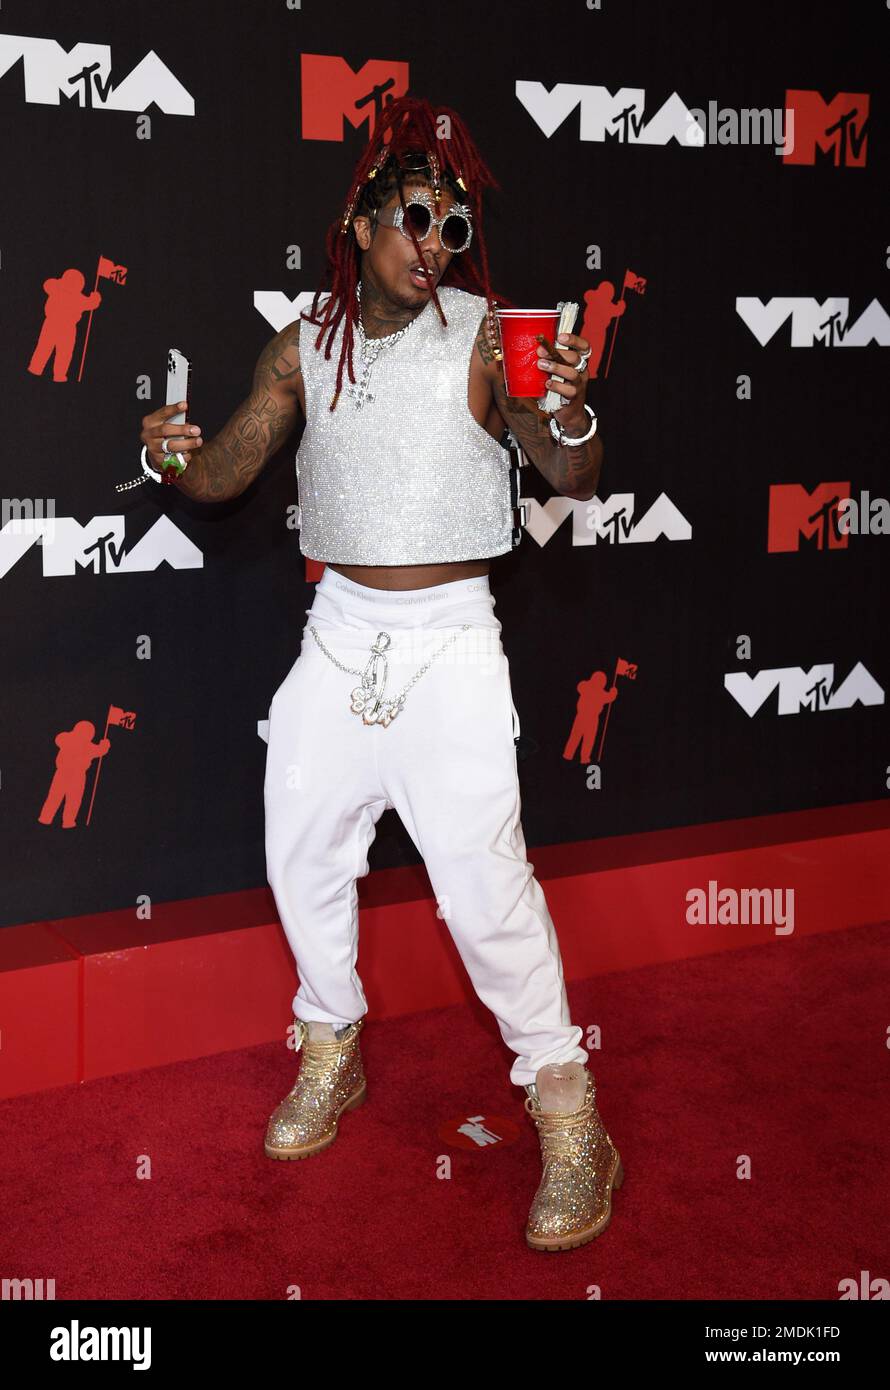 Nick Cannon arrives to the MTV Music Video Awards in Miami. August 28,  2005.CannonNick345 Red Carpet Event, Vertical, USA, Film Industry,  Celebrities, Photography, Bestof, Arts Culture and Entertainment, Topix  Celebrities fashion /